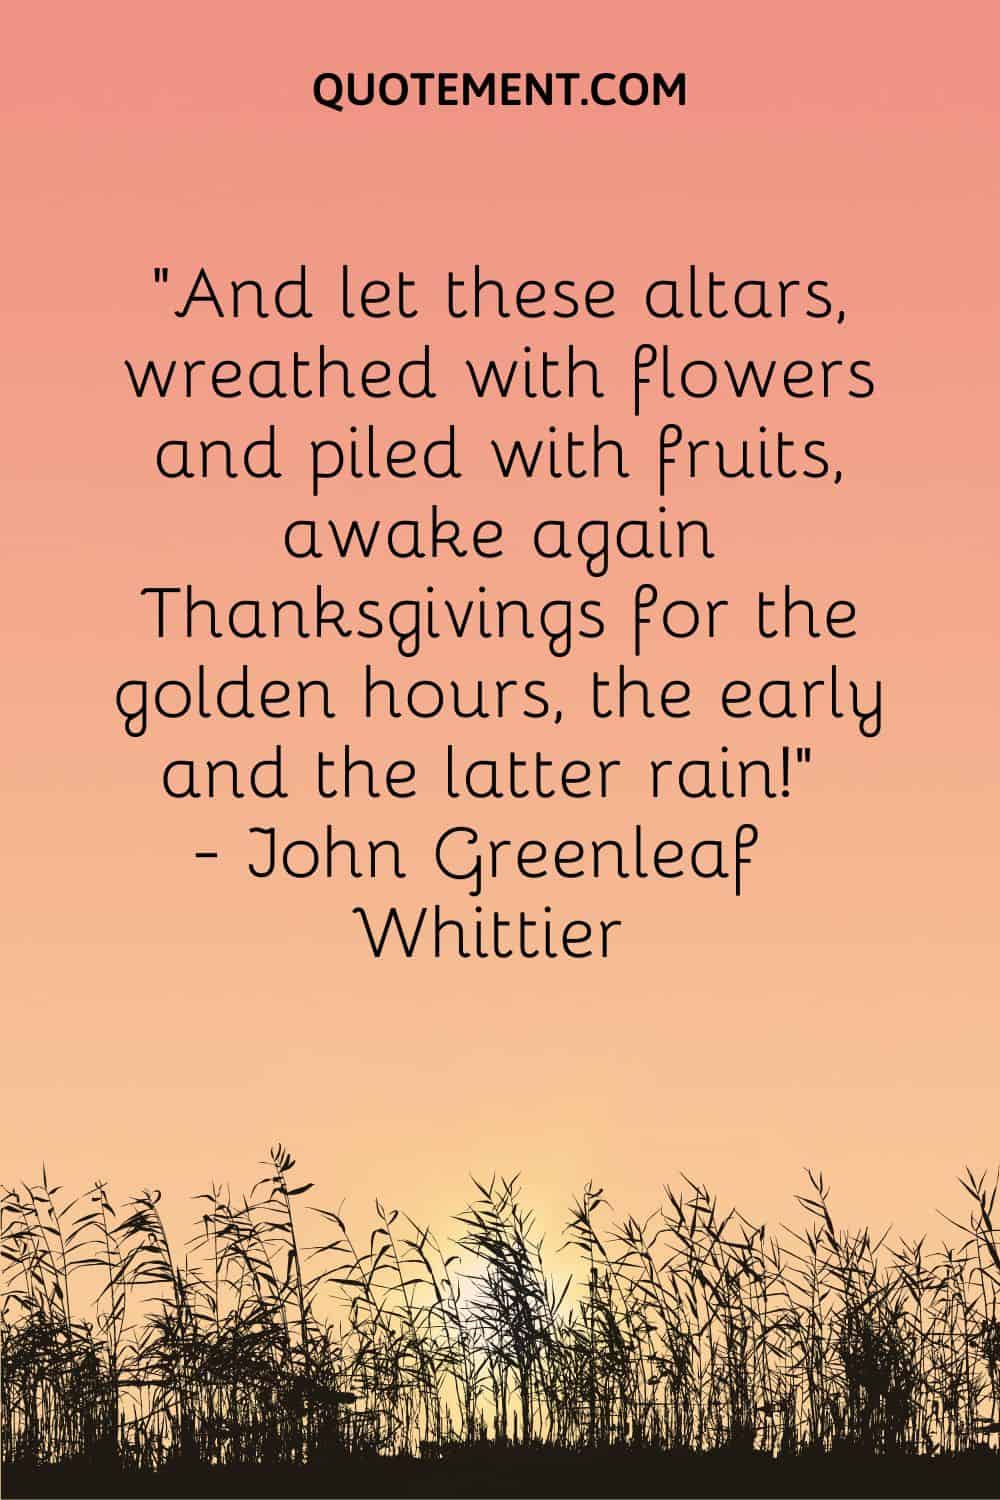 And let these altars, wreathed with flowers and piled with fruits, awake again Thanksgivings for the golden hours, the early and the latter rain